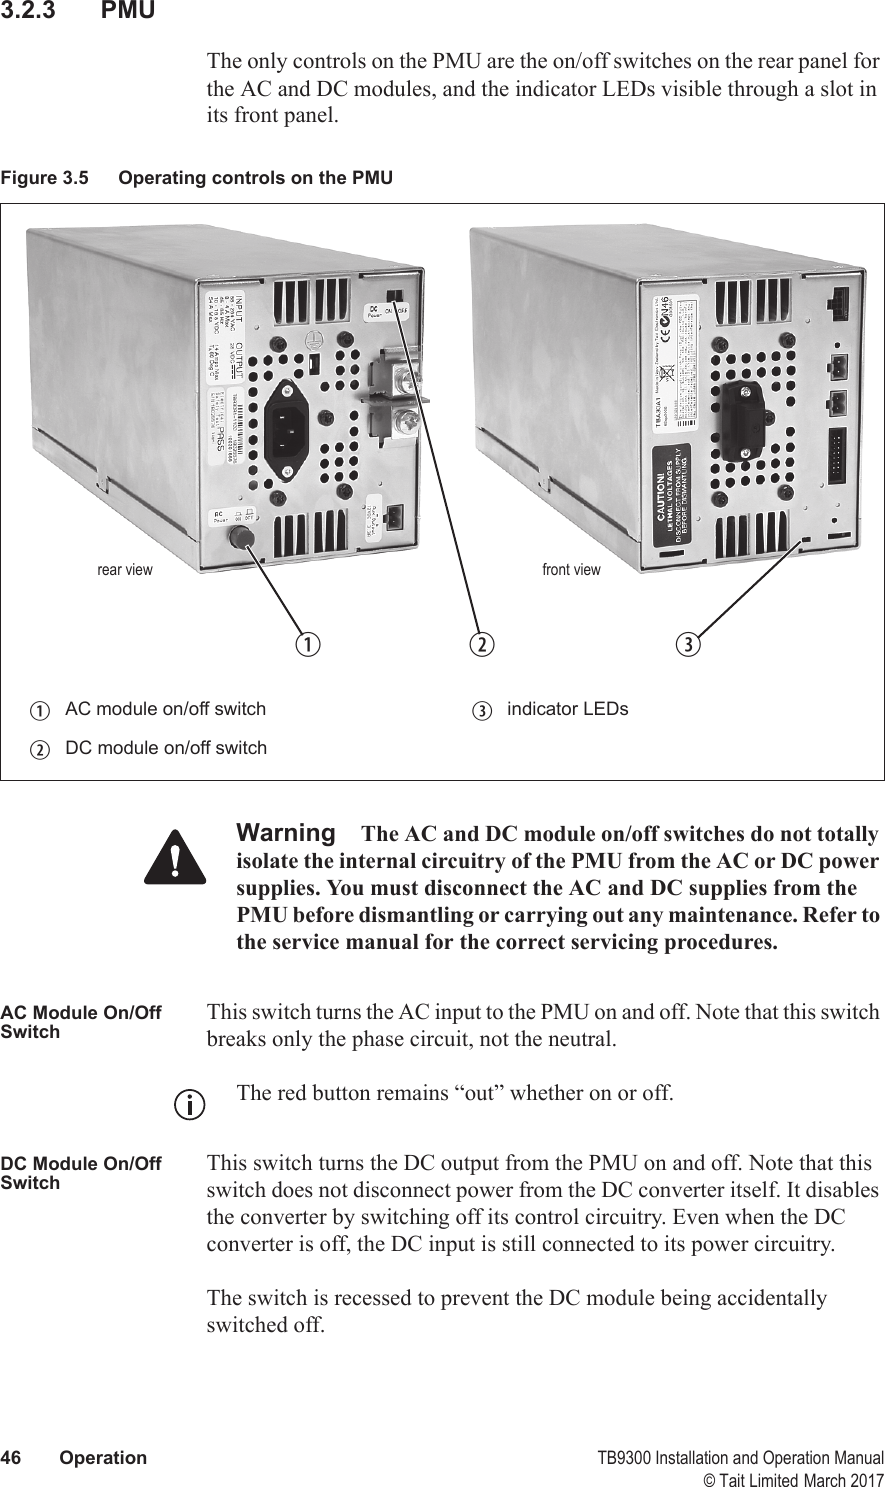  46 Operation TB9300 Installation and Operation Manual© Tait Limited March 20173.2.3 PMUThe only controls on the PMU are the on/off switches on the rear panel for the AC and DC modules, and the indicator LEDs visible through a slot in its front panel.Warning The AC and DC module on/off switches do not totally isolate the internal circuitry of the PMU from the AC or DC power supplies. You must disconnect the AC and DC supplies from the PMU before dismantling or carrying out any maintenance. Refer to the service manual for the correct servicing procedures.AC Module On/Off SwitchThis switch turns the AC input to the PMU on and off. Note that this switch breaks only the phase circuit, not the neutral.The red button remains “out” whether on or off.DC Module On/Off SwitchThis switch turns the DC output from the PMU on and off. Note that this switch does not disconnect power from the DC converter itself. It disables the converter by switching off its control circuitry. Even when the DC converter is off, the DC input is still connected to its power circuitry. The switch is recessed to prevent the DC module being accidentally switched off. Figure 3.5 Operating controls on the PMUbAC module on/off switch dindicator LEDscDC module on/off switchb crear viewdfront view